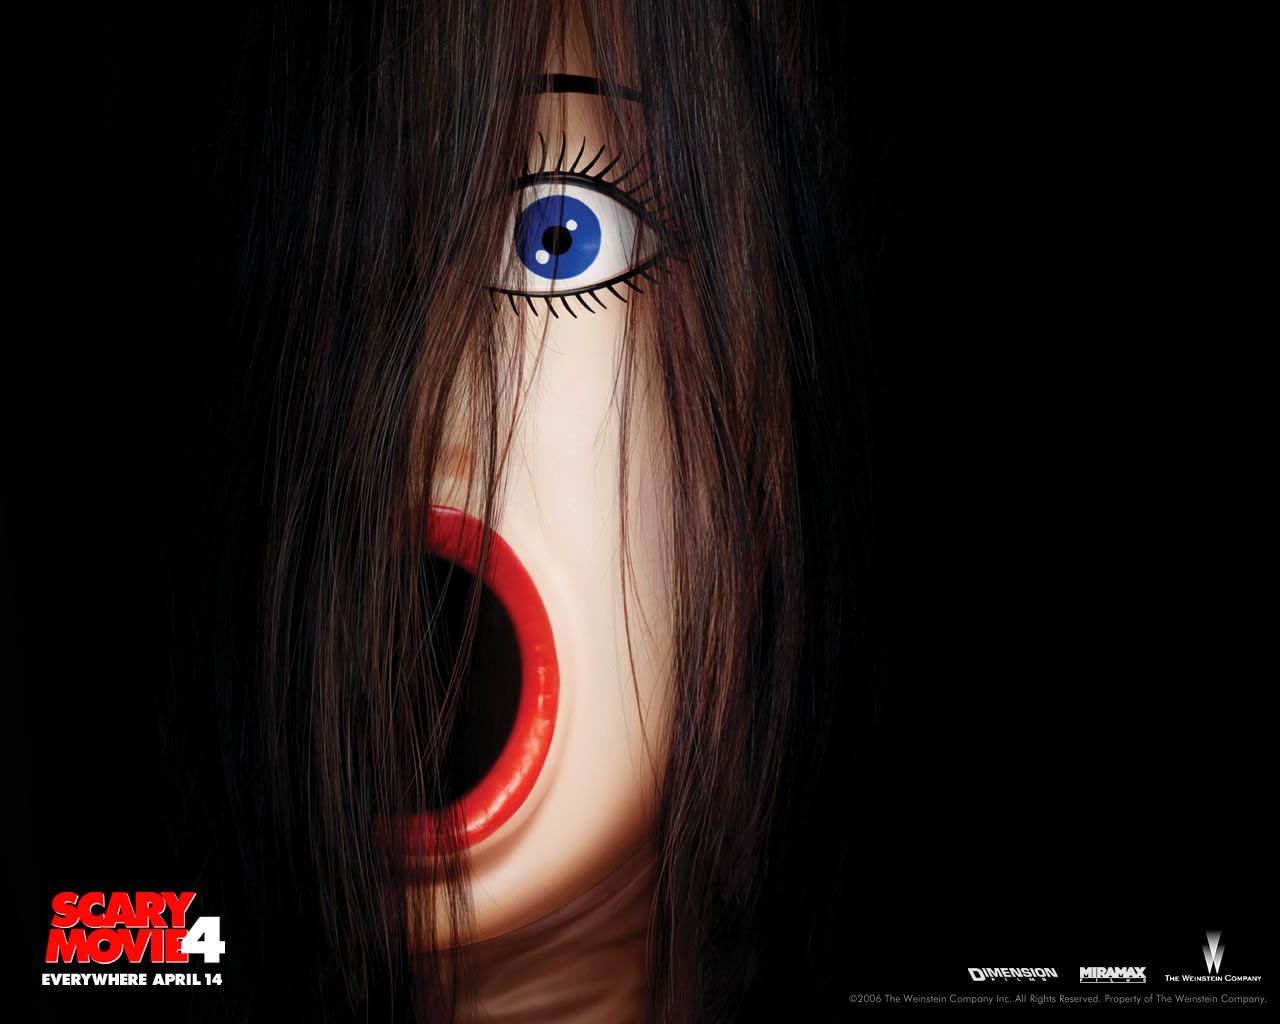 Scary Movie 4 Wallpaper. Scary